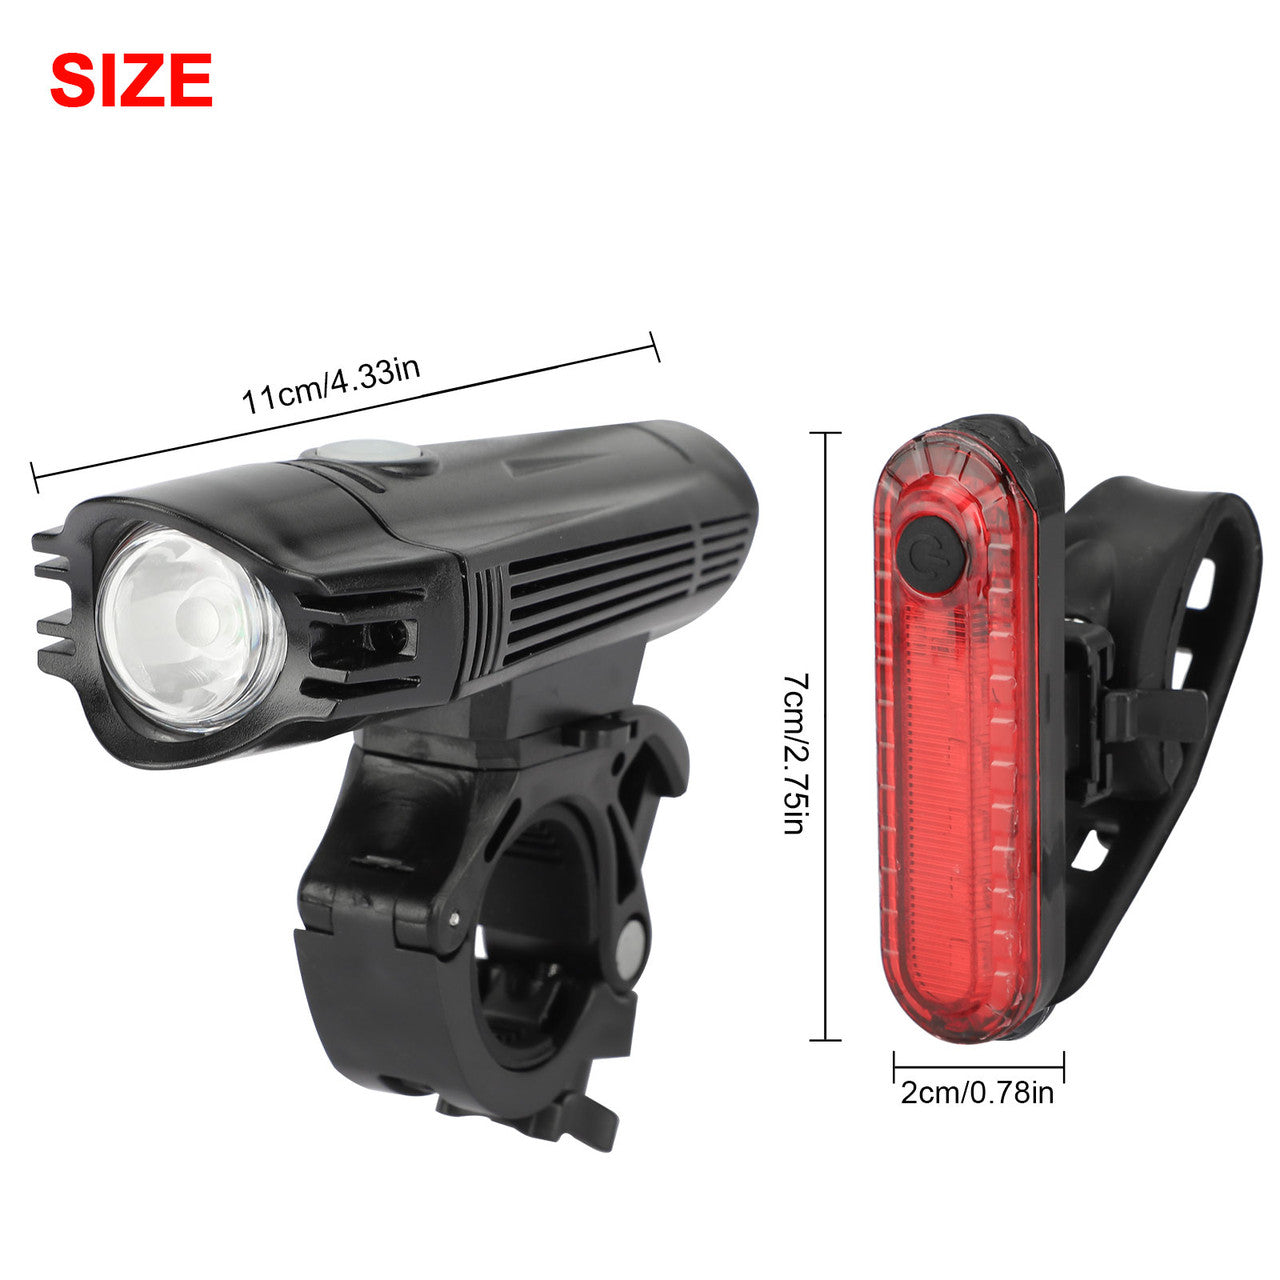 USB Rechargeable LED Bike Light Set, Bicycle Headlight and Taillight Kit, with Mounting Bracket and 4 Light Modes, Waterproof for Kids Men Women Cycling Hiking Camping or Any Outdoor Activity